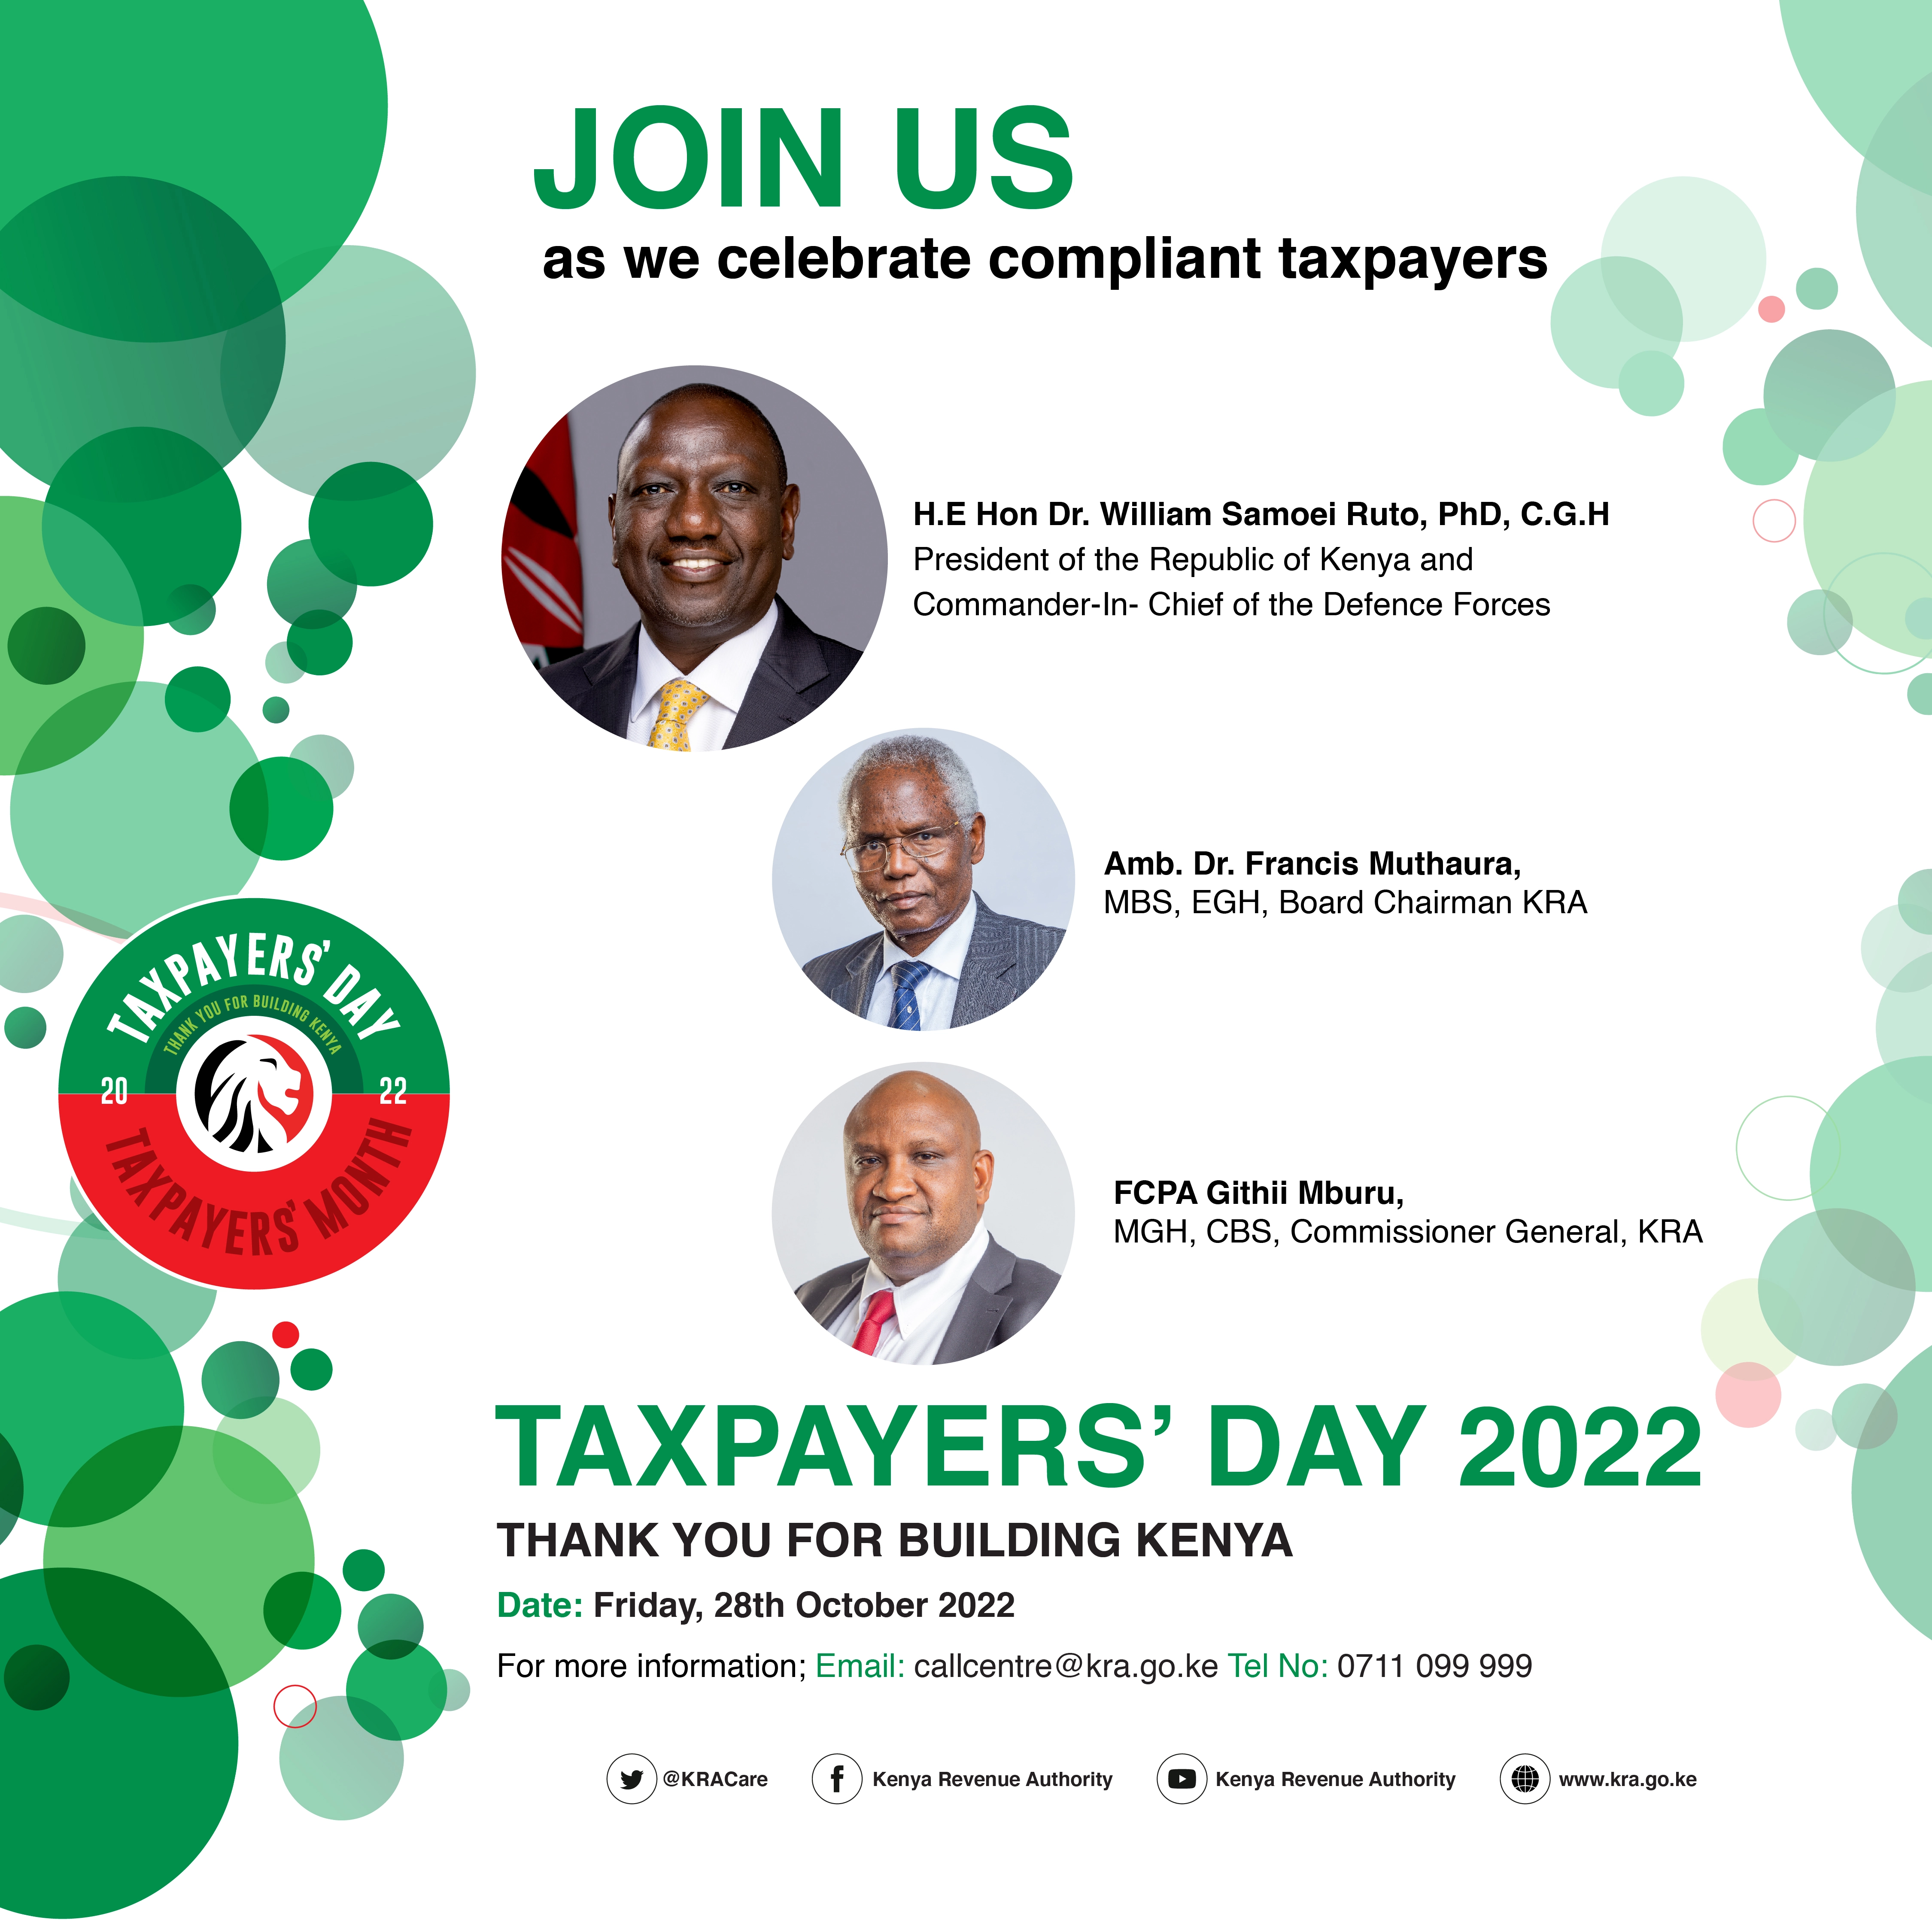 A banner with an invite message for the kenyan public to the 2022 taxpayers day event. The event will be graced by Kenyan President, William Ruto